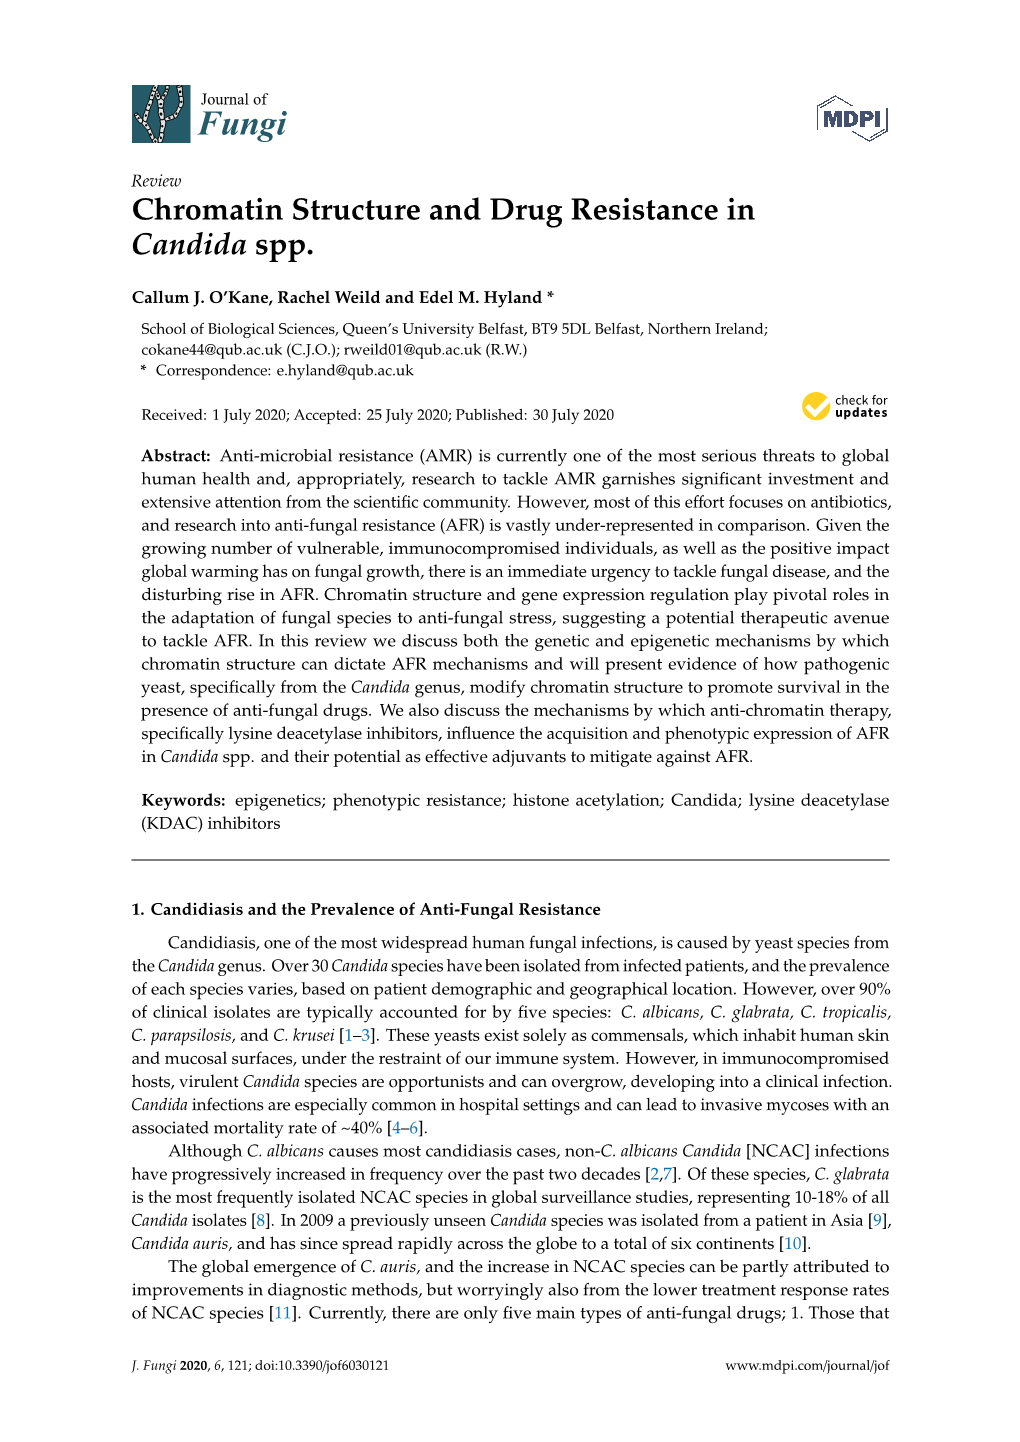 Chromatin Structure and Drug Resistance in Candida Spp